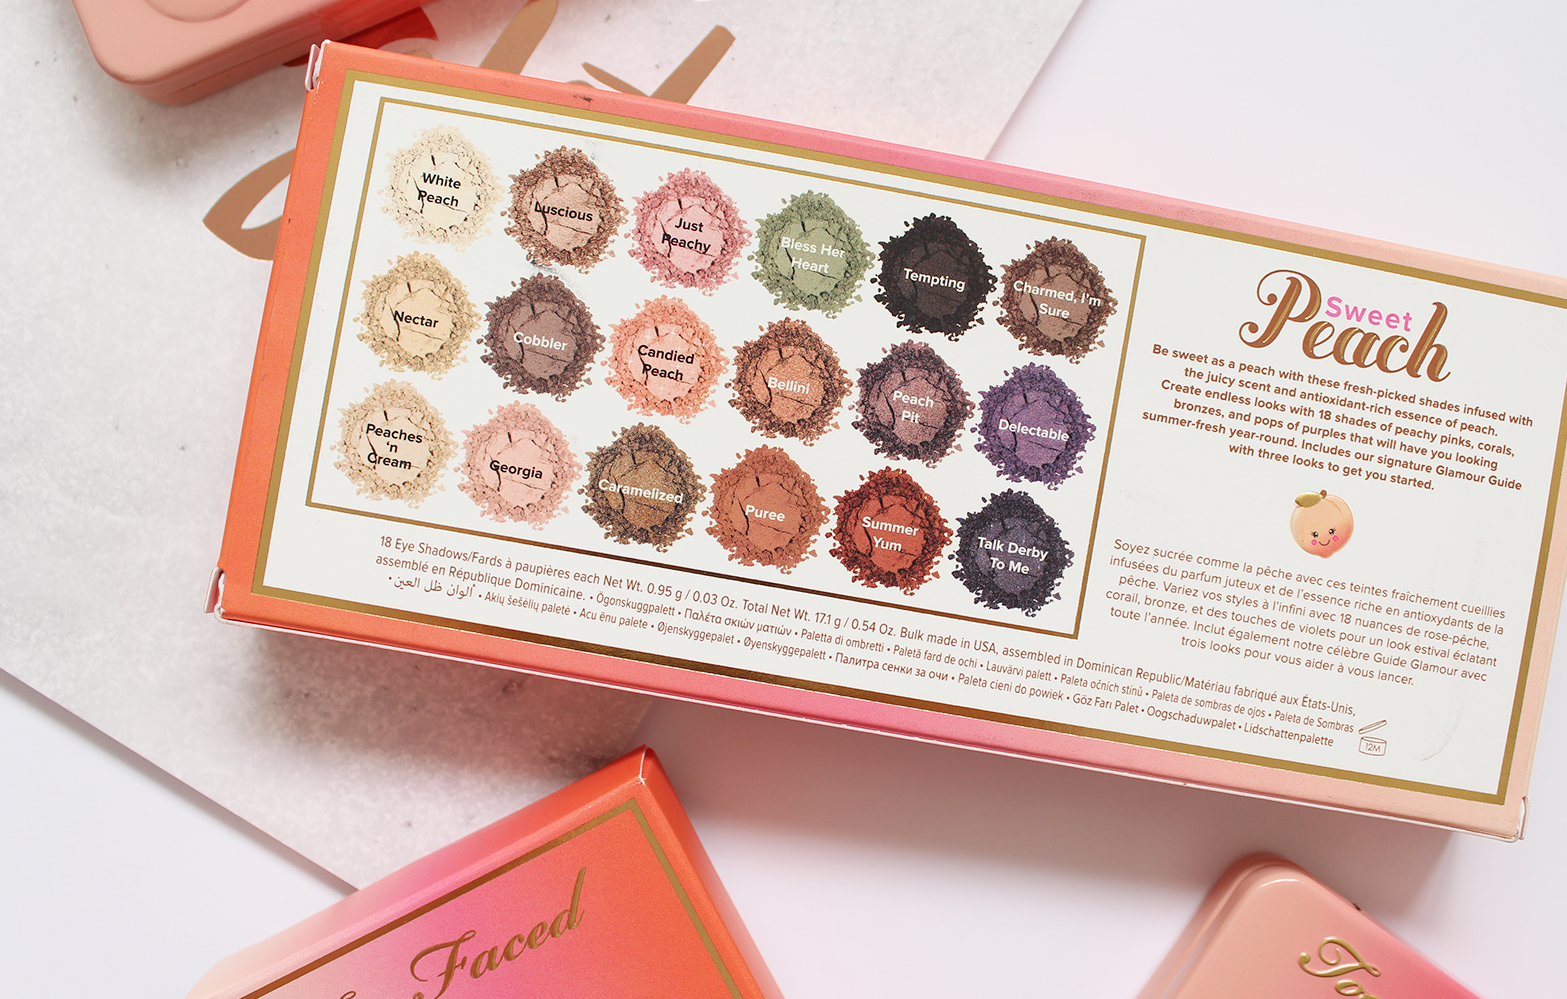 TOO FACED | Sweet Peach Eyeshadow Collection + Papa Don't Peach Peach-Infused Blush - Review + Swatches - CassandraMyee